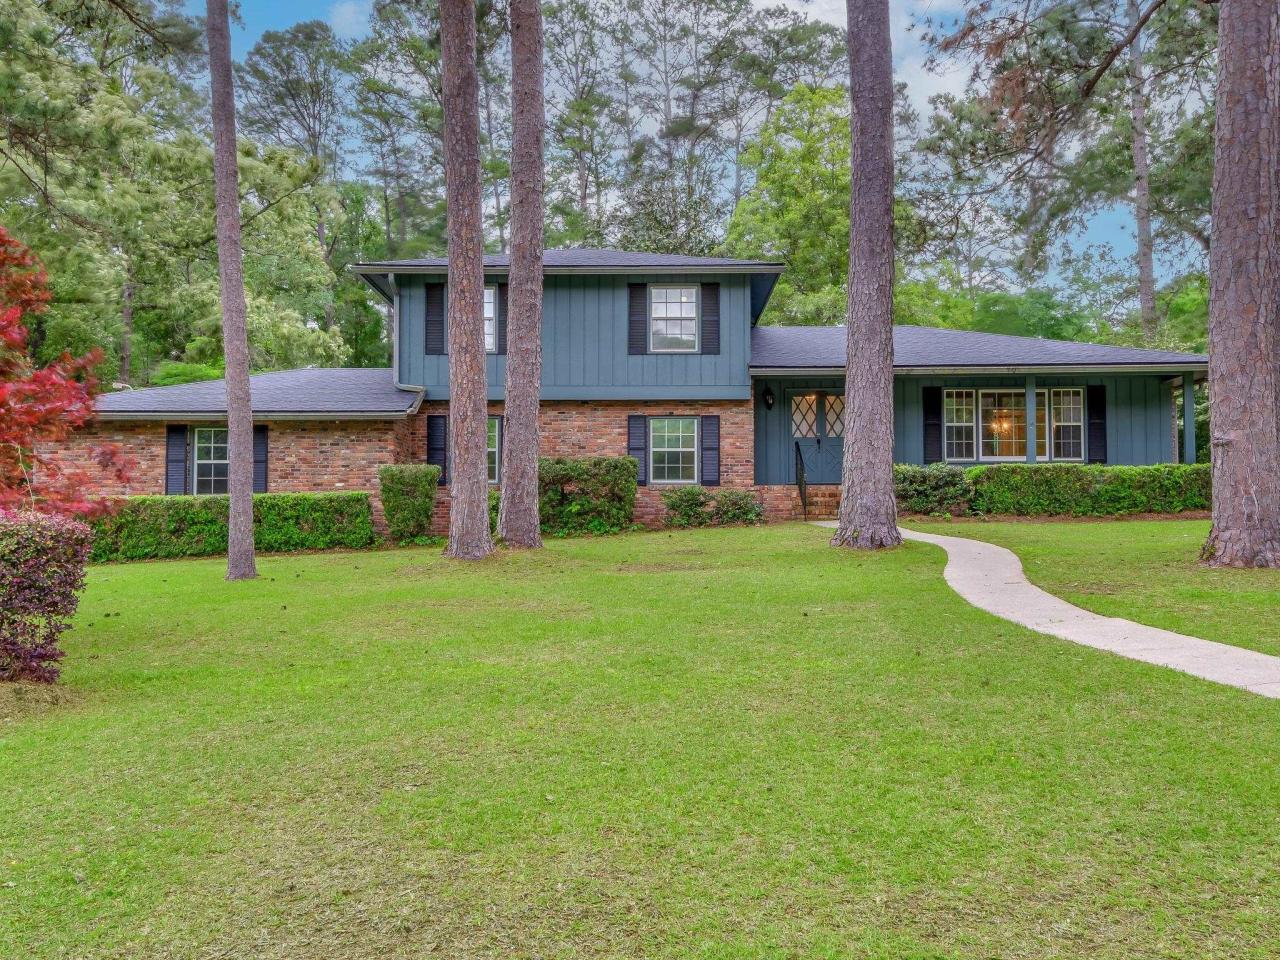  Maps and Schools 3705 Galway Drive, TALLAHASSEE, FL 32309: Homes for Sale - Hommati  ad6f198c055b7f2949ea3276545a8e4d